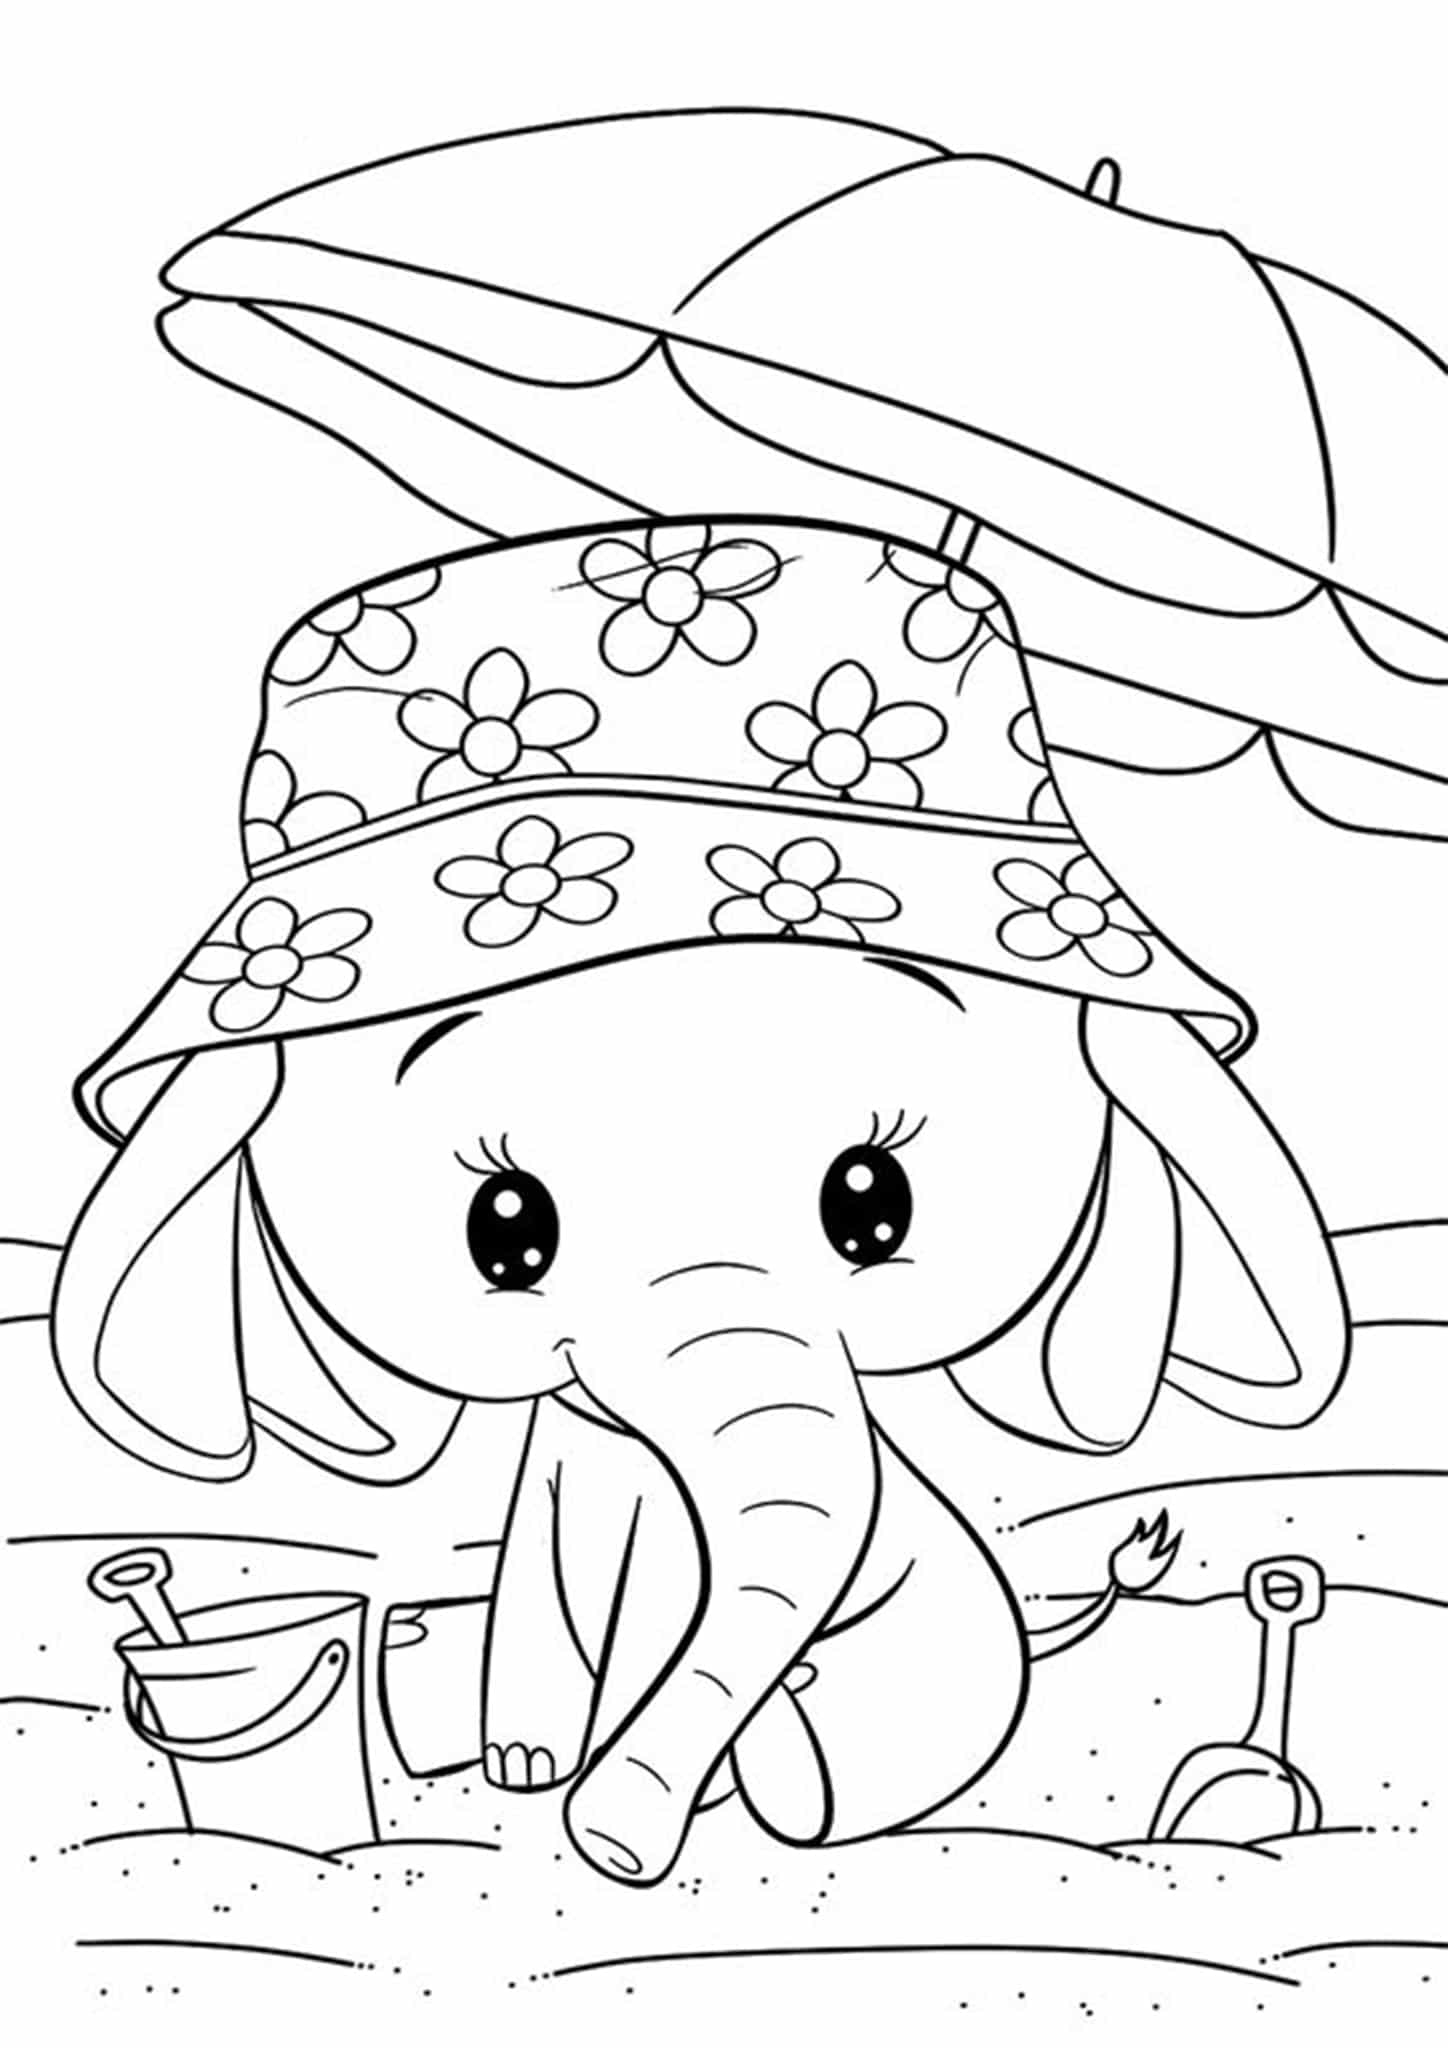 Free & Easy To Print Elephant Coloring Pages   Tulamama